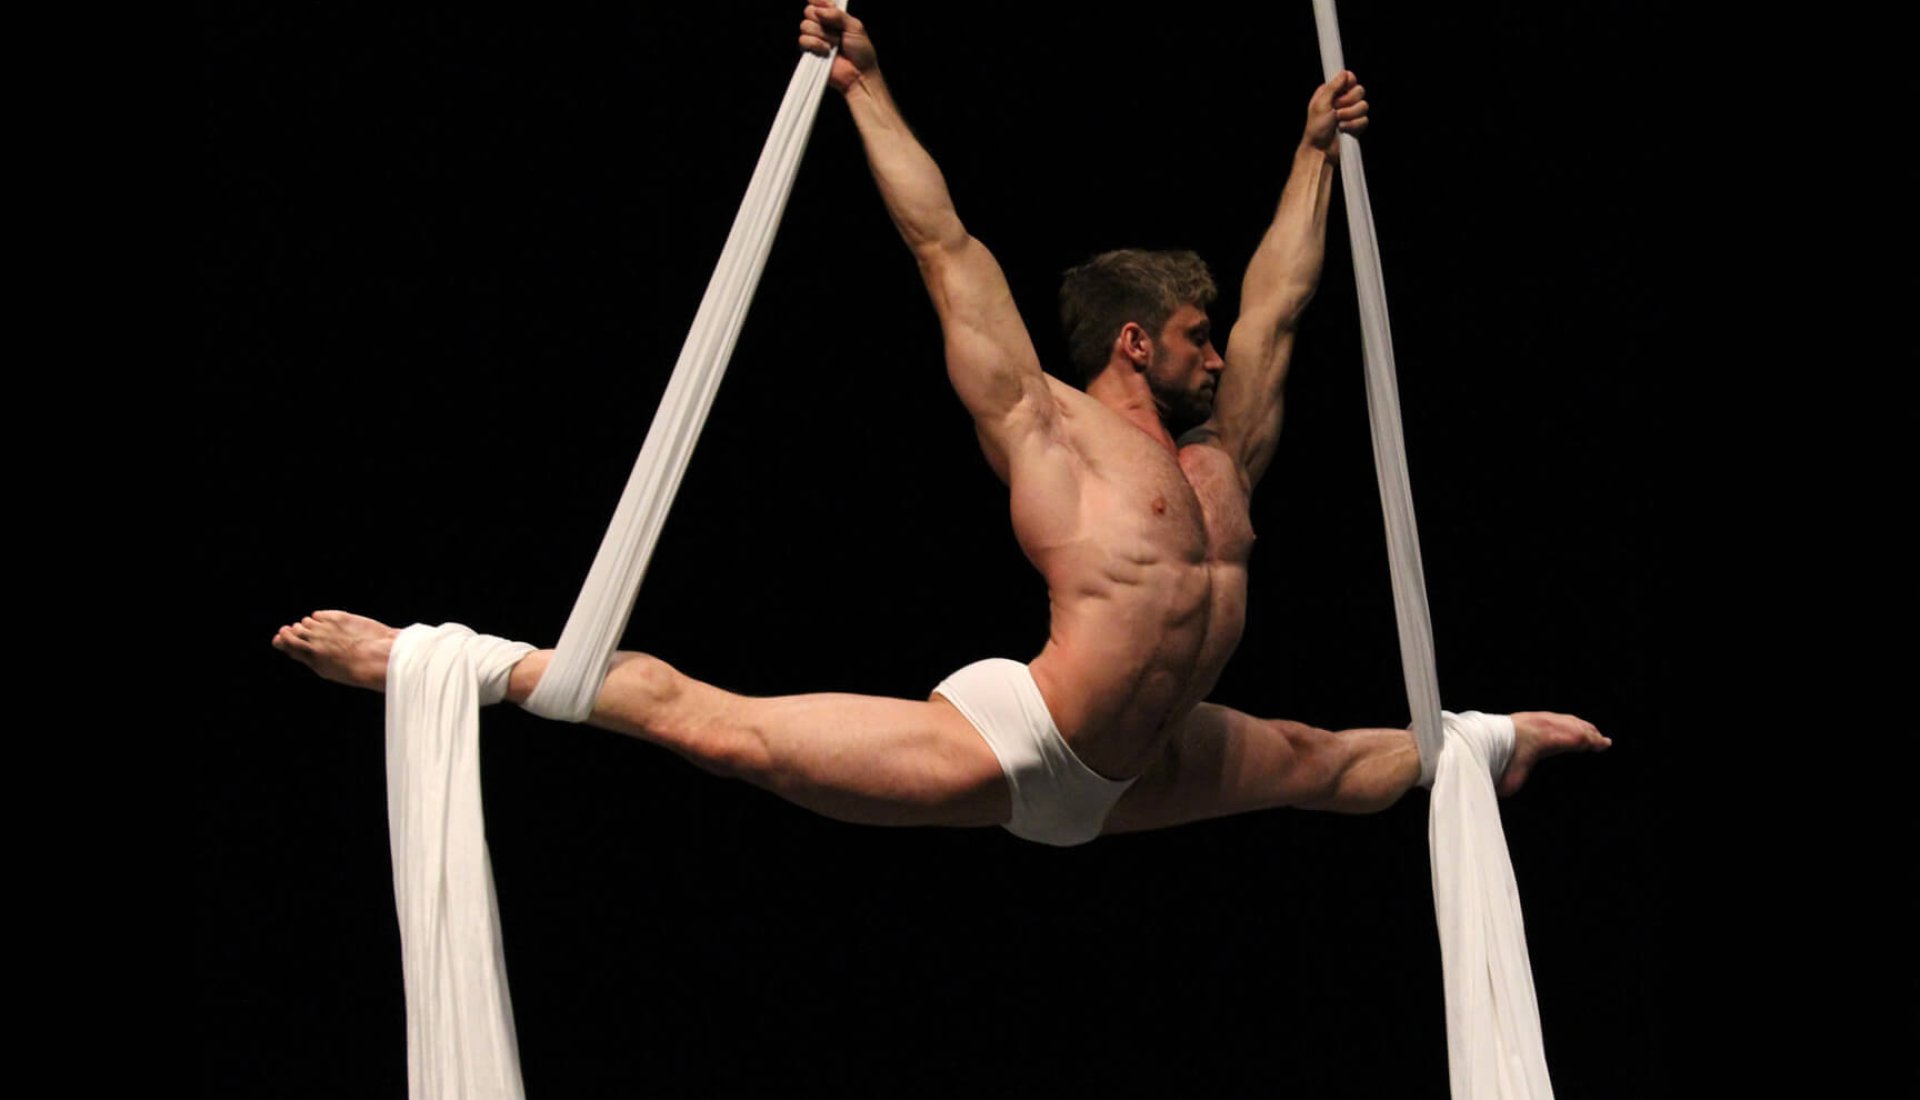 Aerial Silks: A professional male aerialist performs a stretch while hanging from a white fabric. 1920x1100 HD Wallpaper.